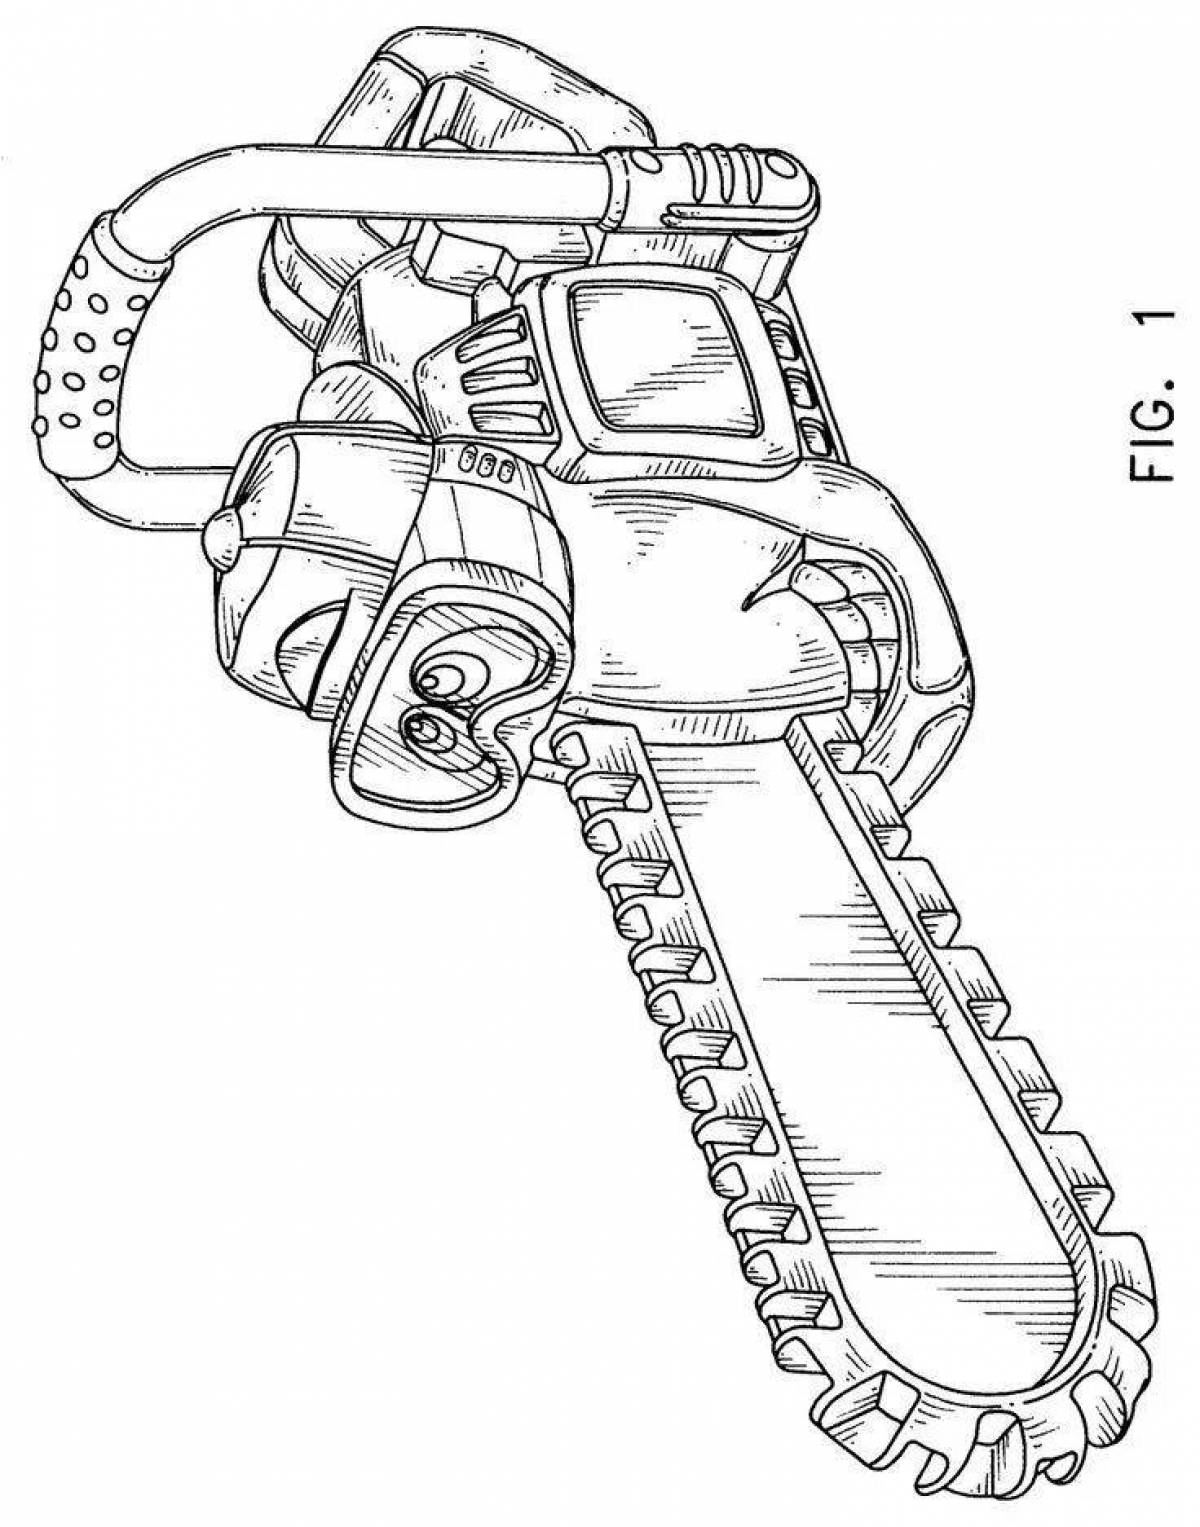 Colorful chainsaw coloring page